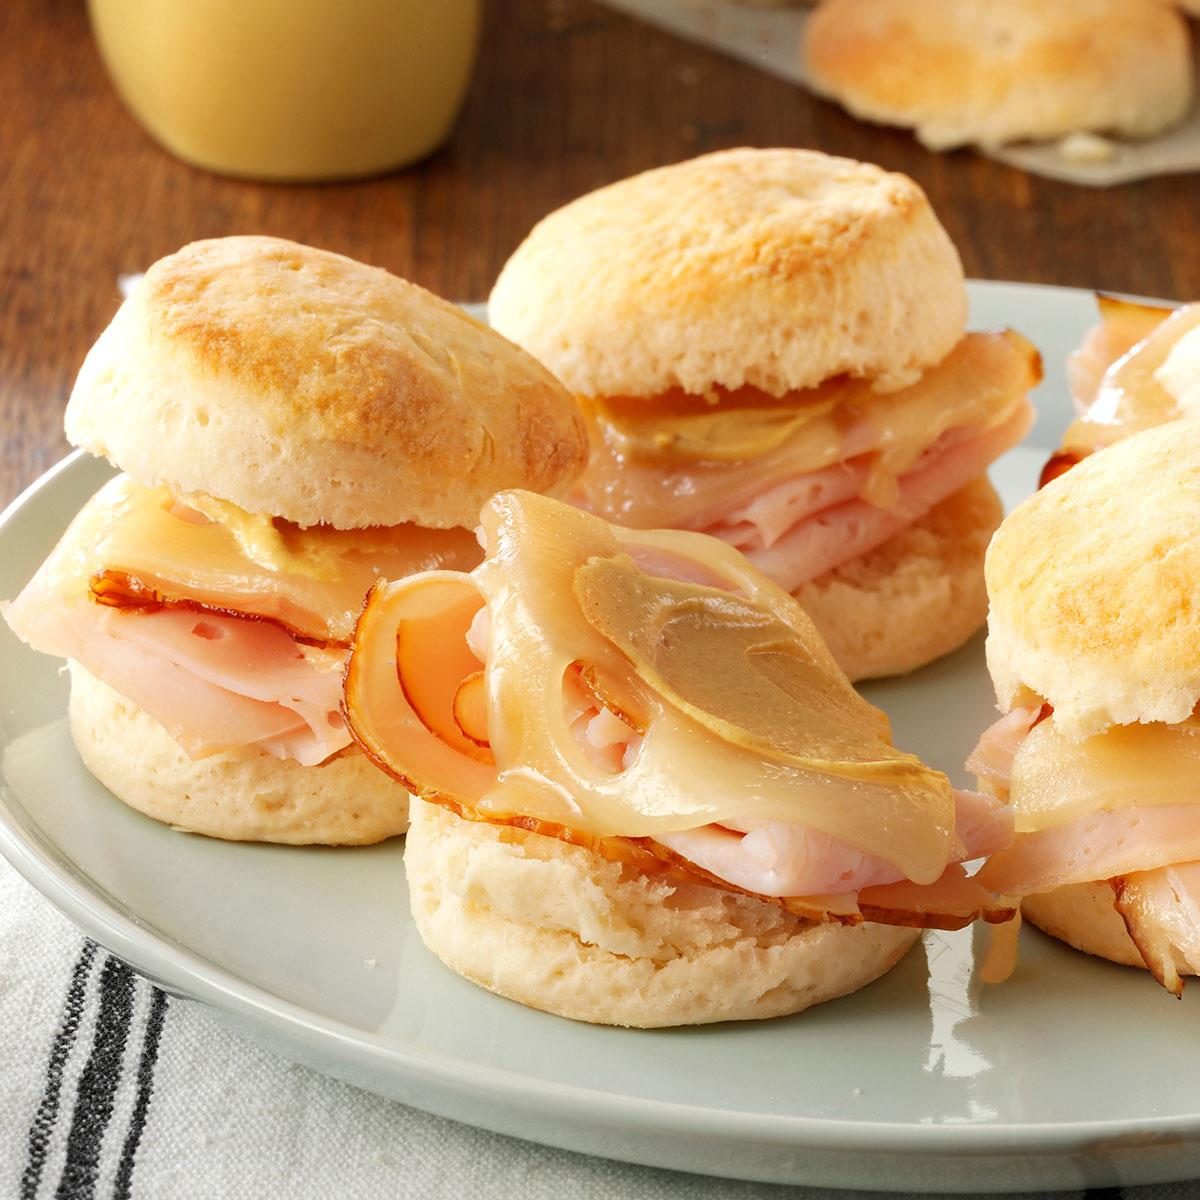 <p>One of my favorite things to whip up in the kitchen is homemade buttermilk biscuits. Simple sandwiches are a wonderful way to showcase these melt-in-your-mouth treats. —Cindy Esposito, Bloomfield, New Jersey</p> <div class="listicle-page__buttons"> <div class="listicle-page__cta-button"><a href='https://www.tasteofhome.com/recipes/turkey-swiss-biscuit-sliders/'>Go to Recipe</a></div> </div>